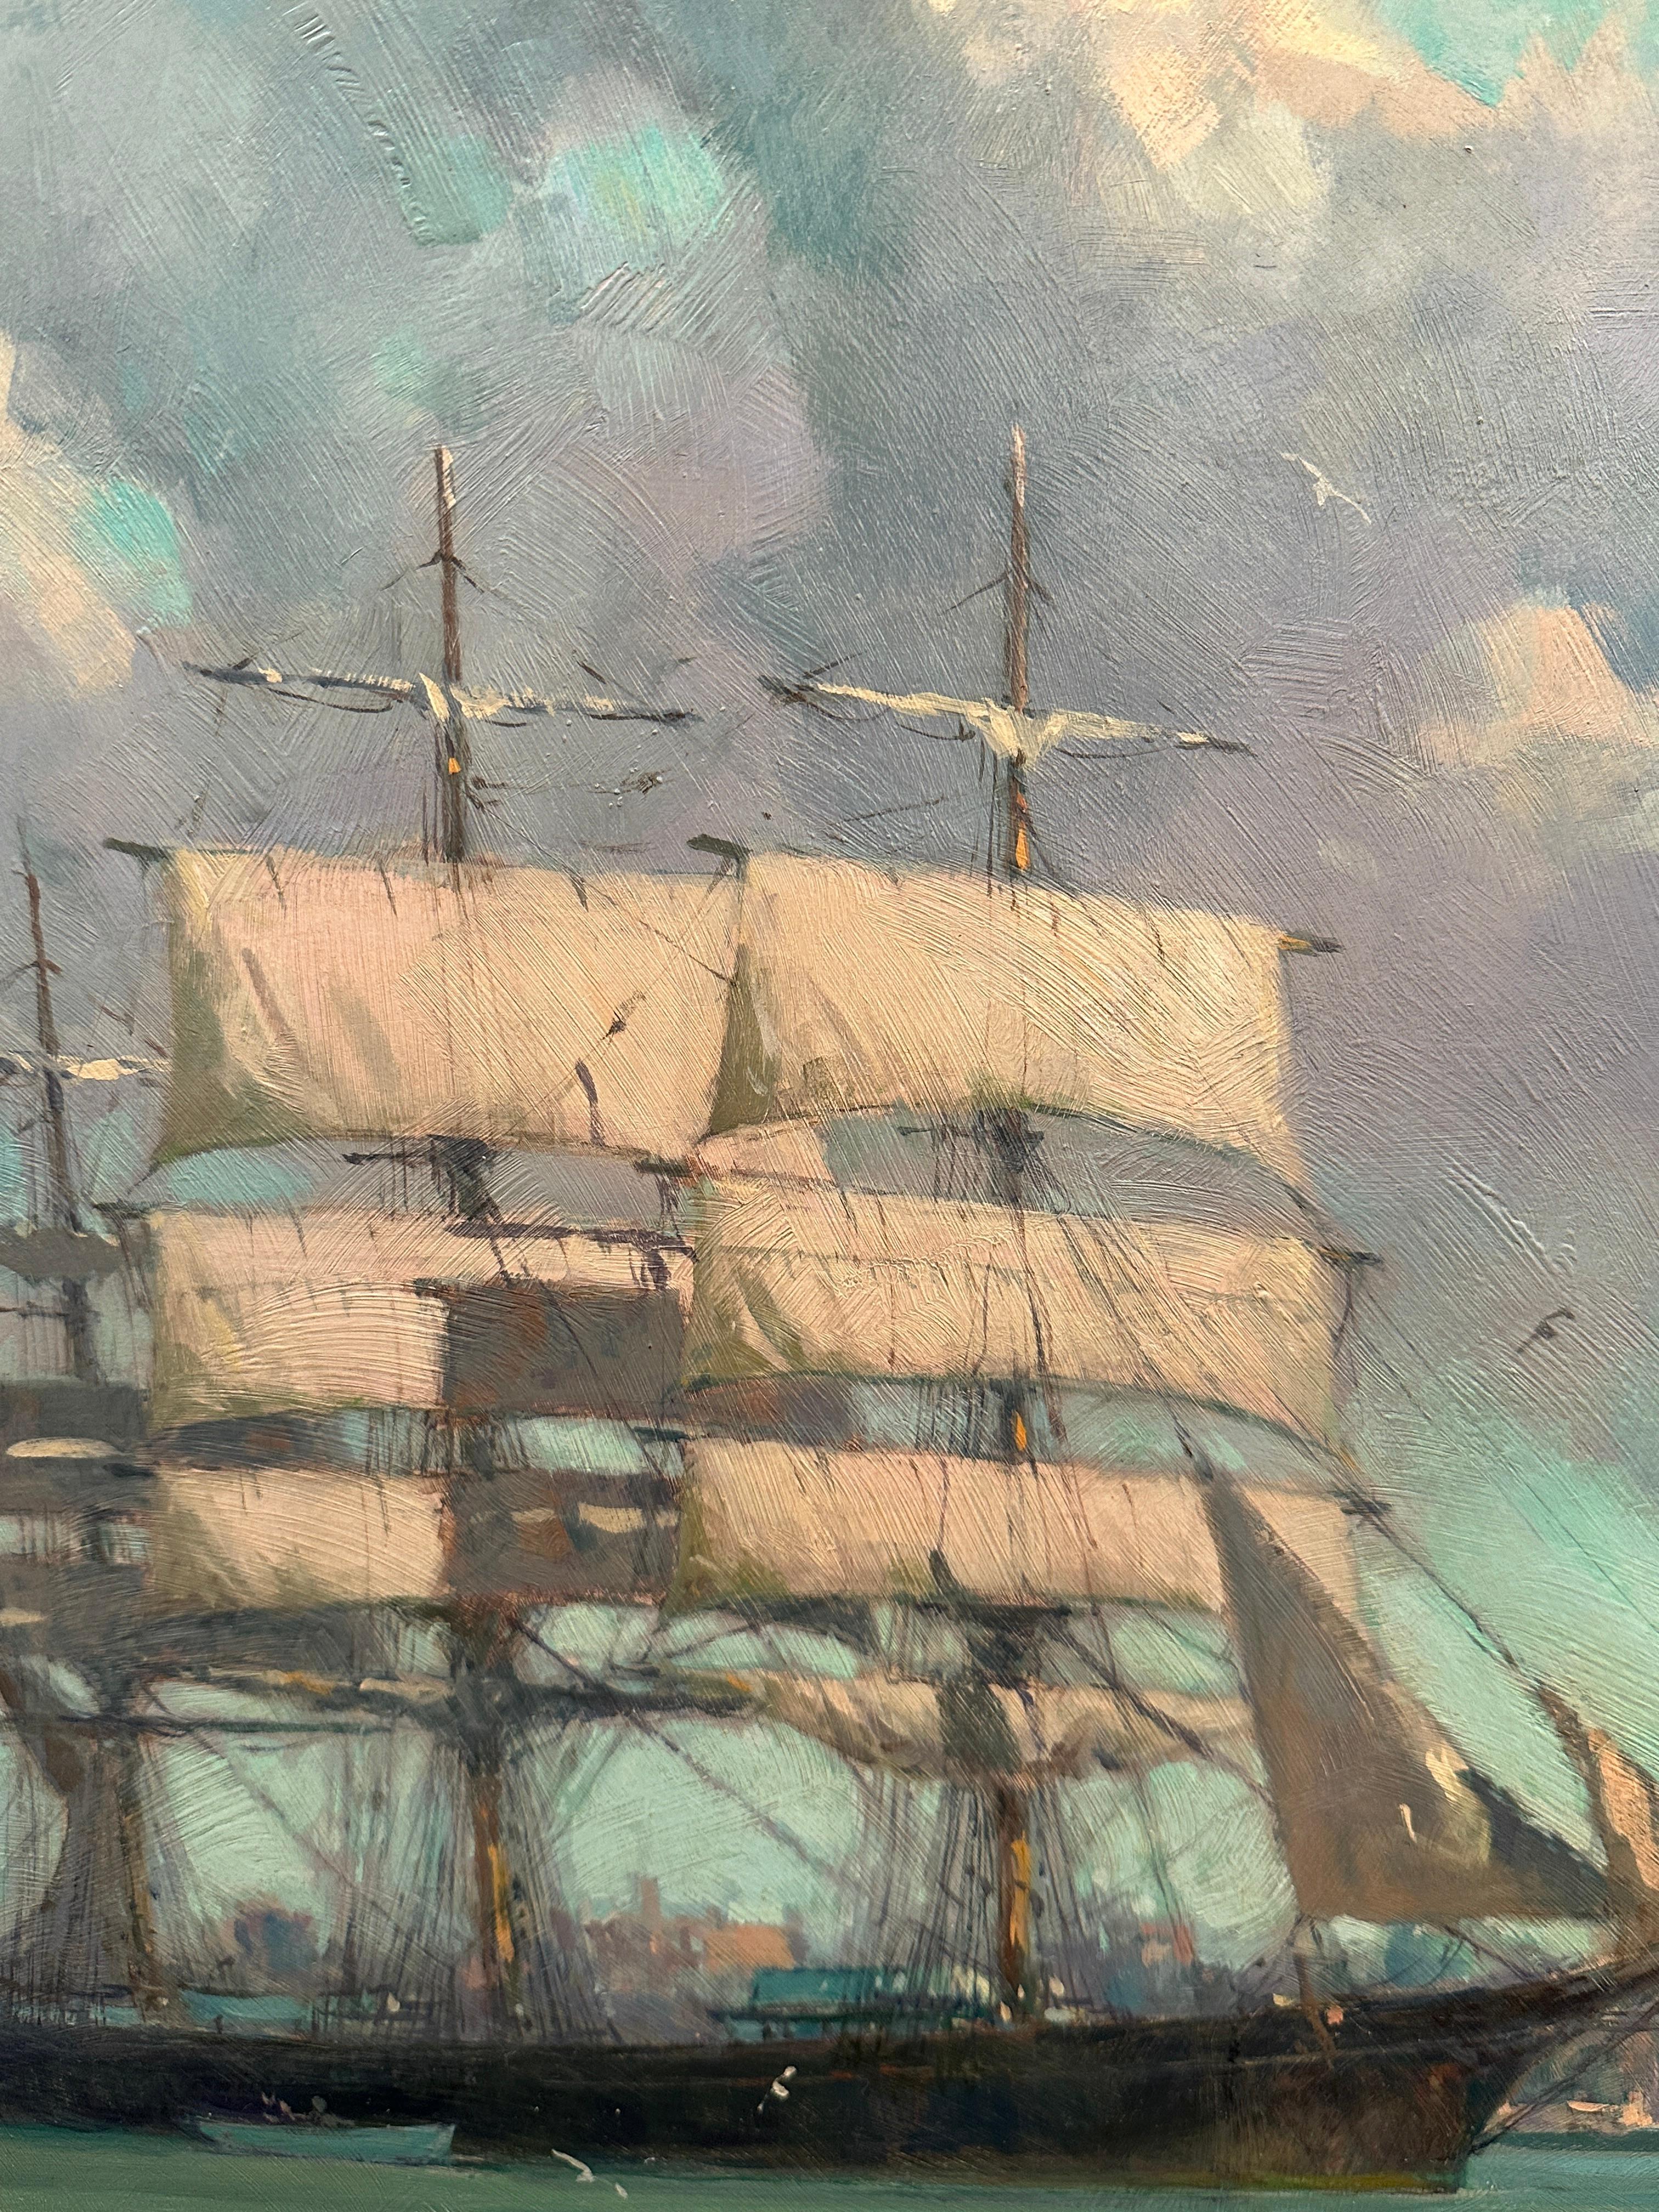 Gordon Hope Grant (1875-1962) was a prominent American artist renowned for his maritime watercolors and his contributions to the American Boy Scouts. Born in San Francisco in 1875 and passing away in 1962. Grant's artistic legacy is notable for